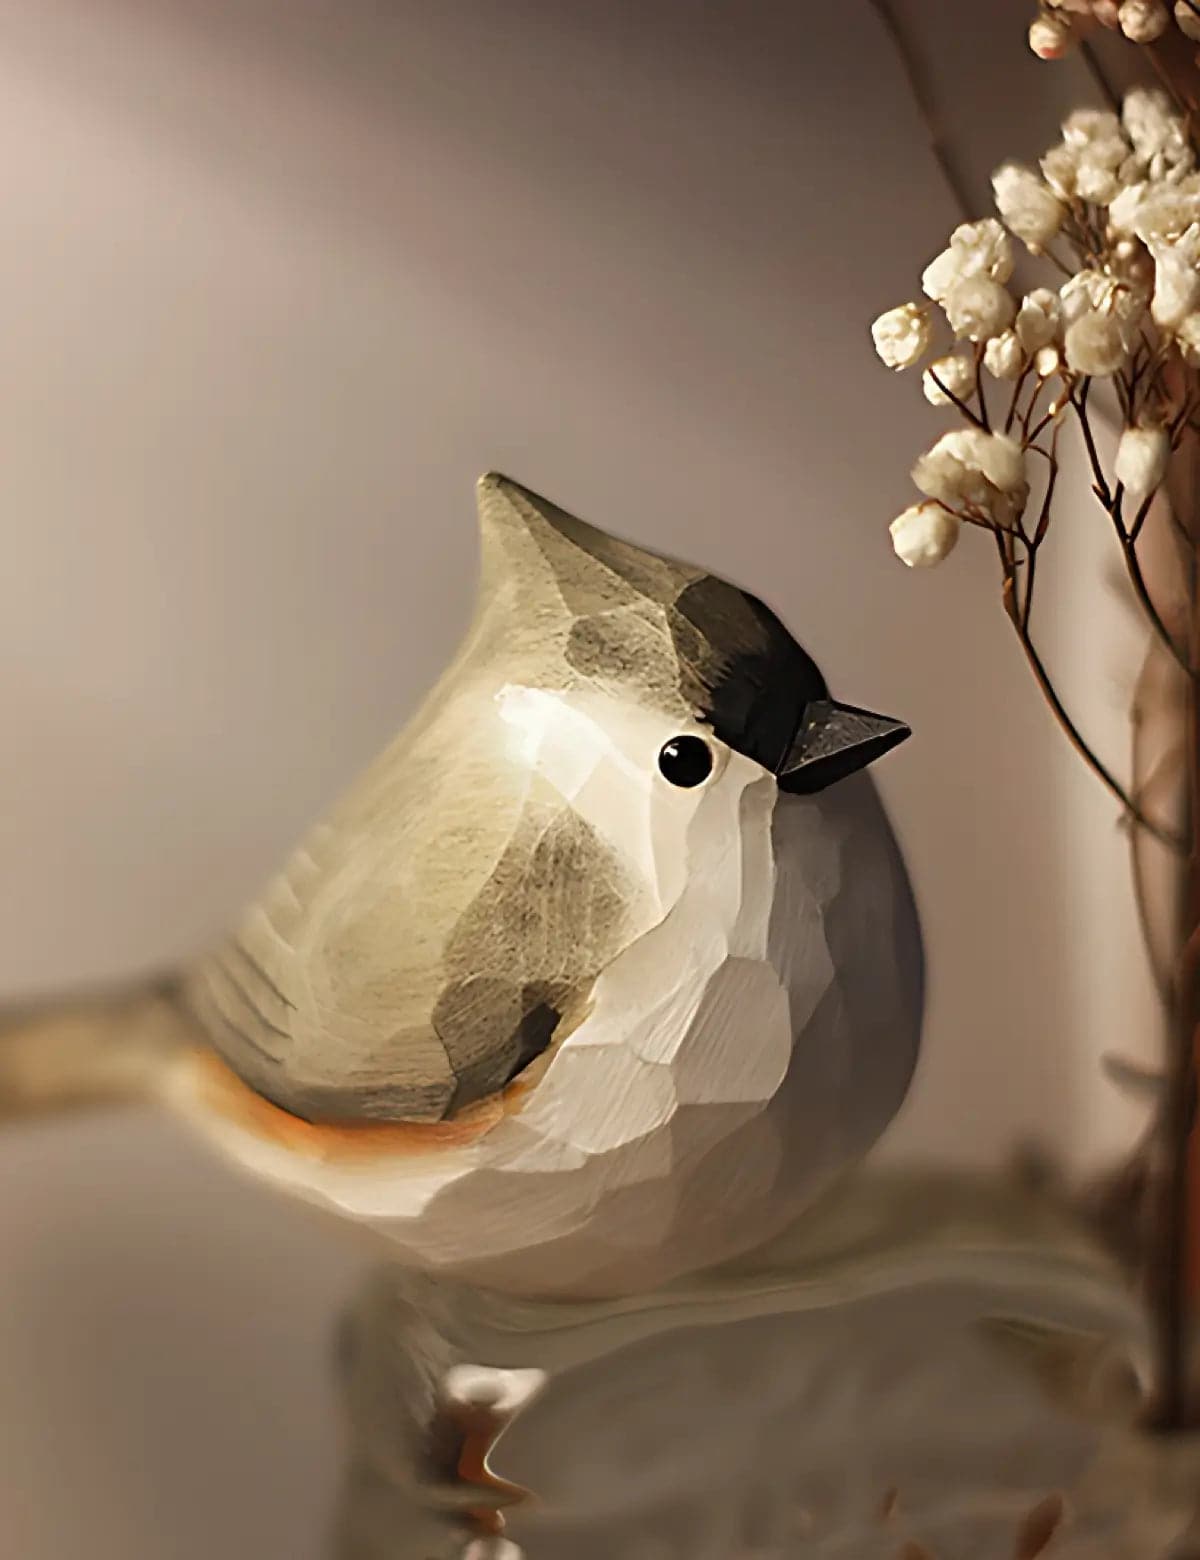 Tufted-Titmouse-Rustic-Decor-Carving-02